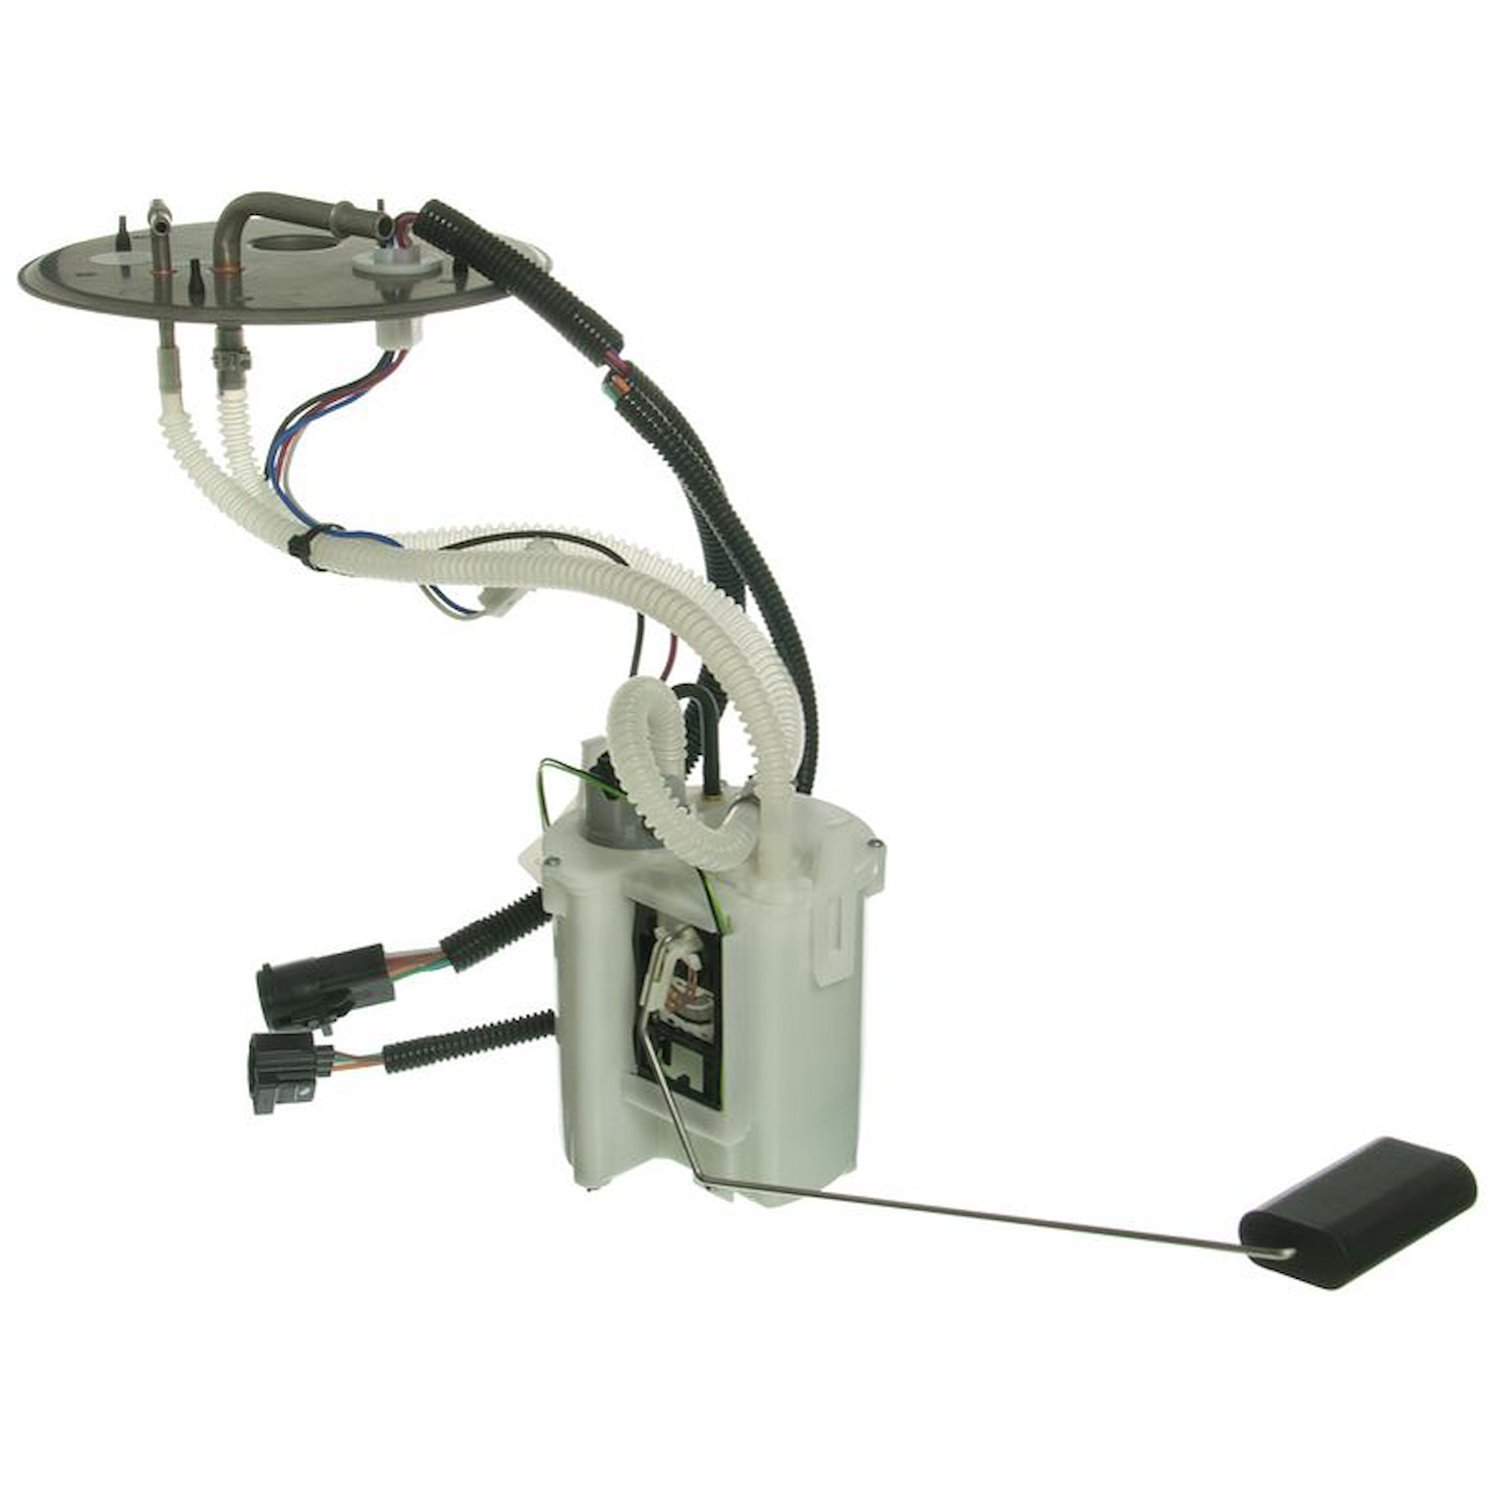 OE Ford Replacement Fuel Pump Module Assembly for 2005-2007 Ford F-350/F-450/F-550 Super Duty